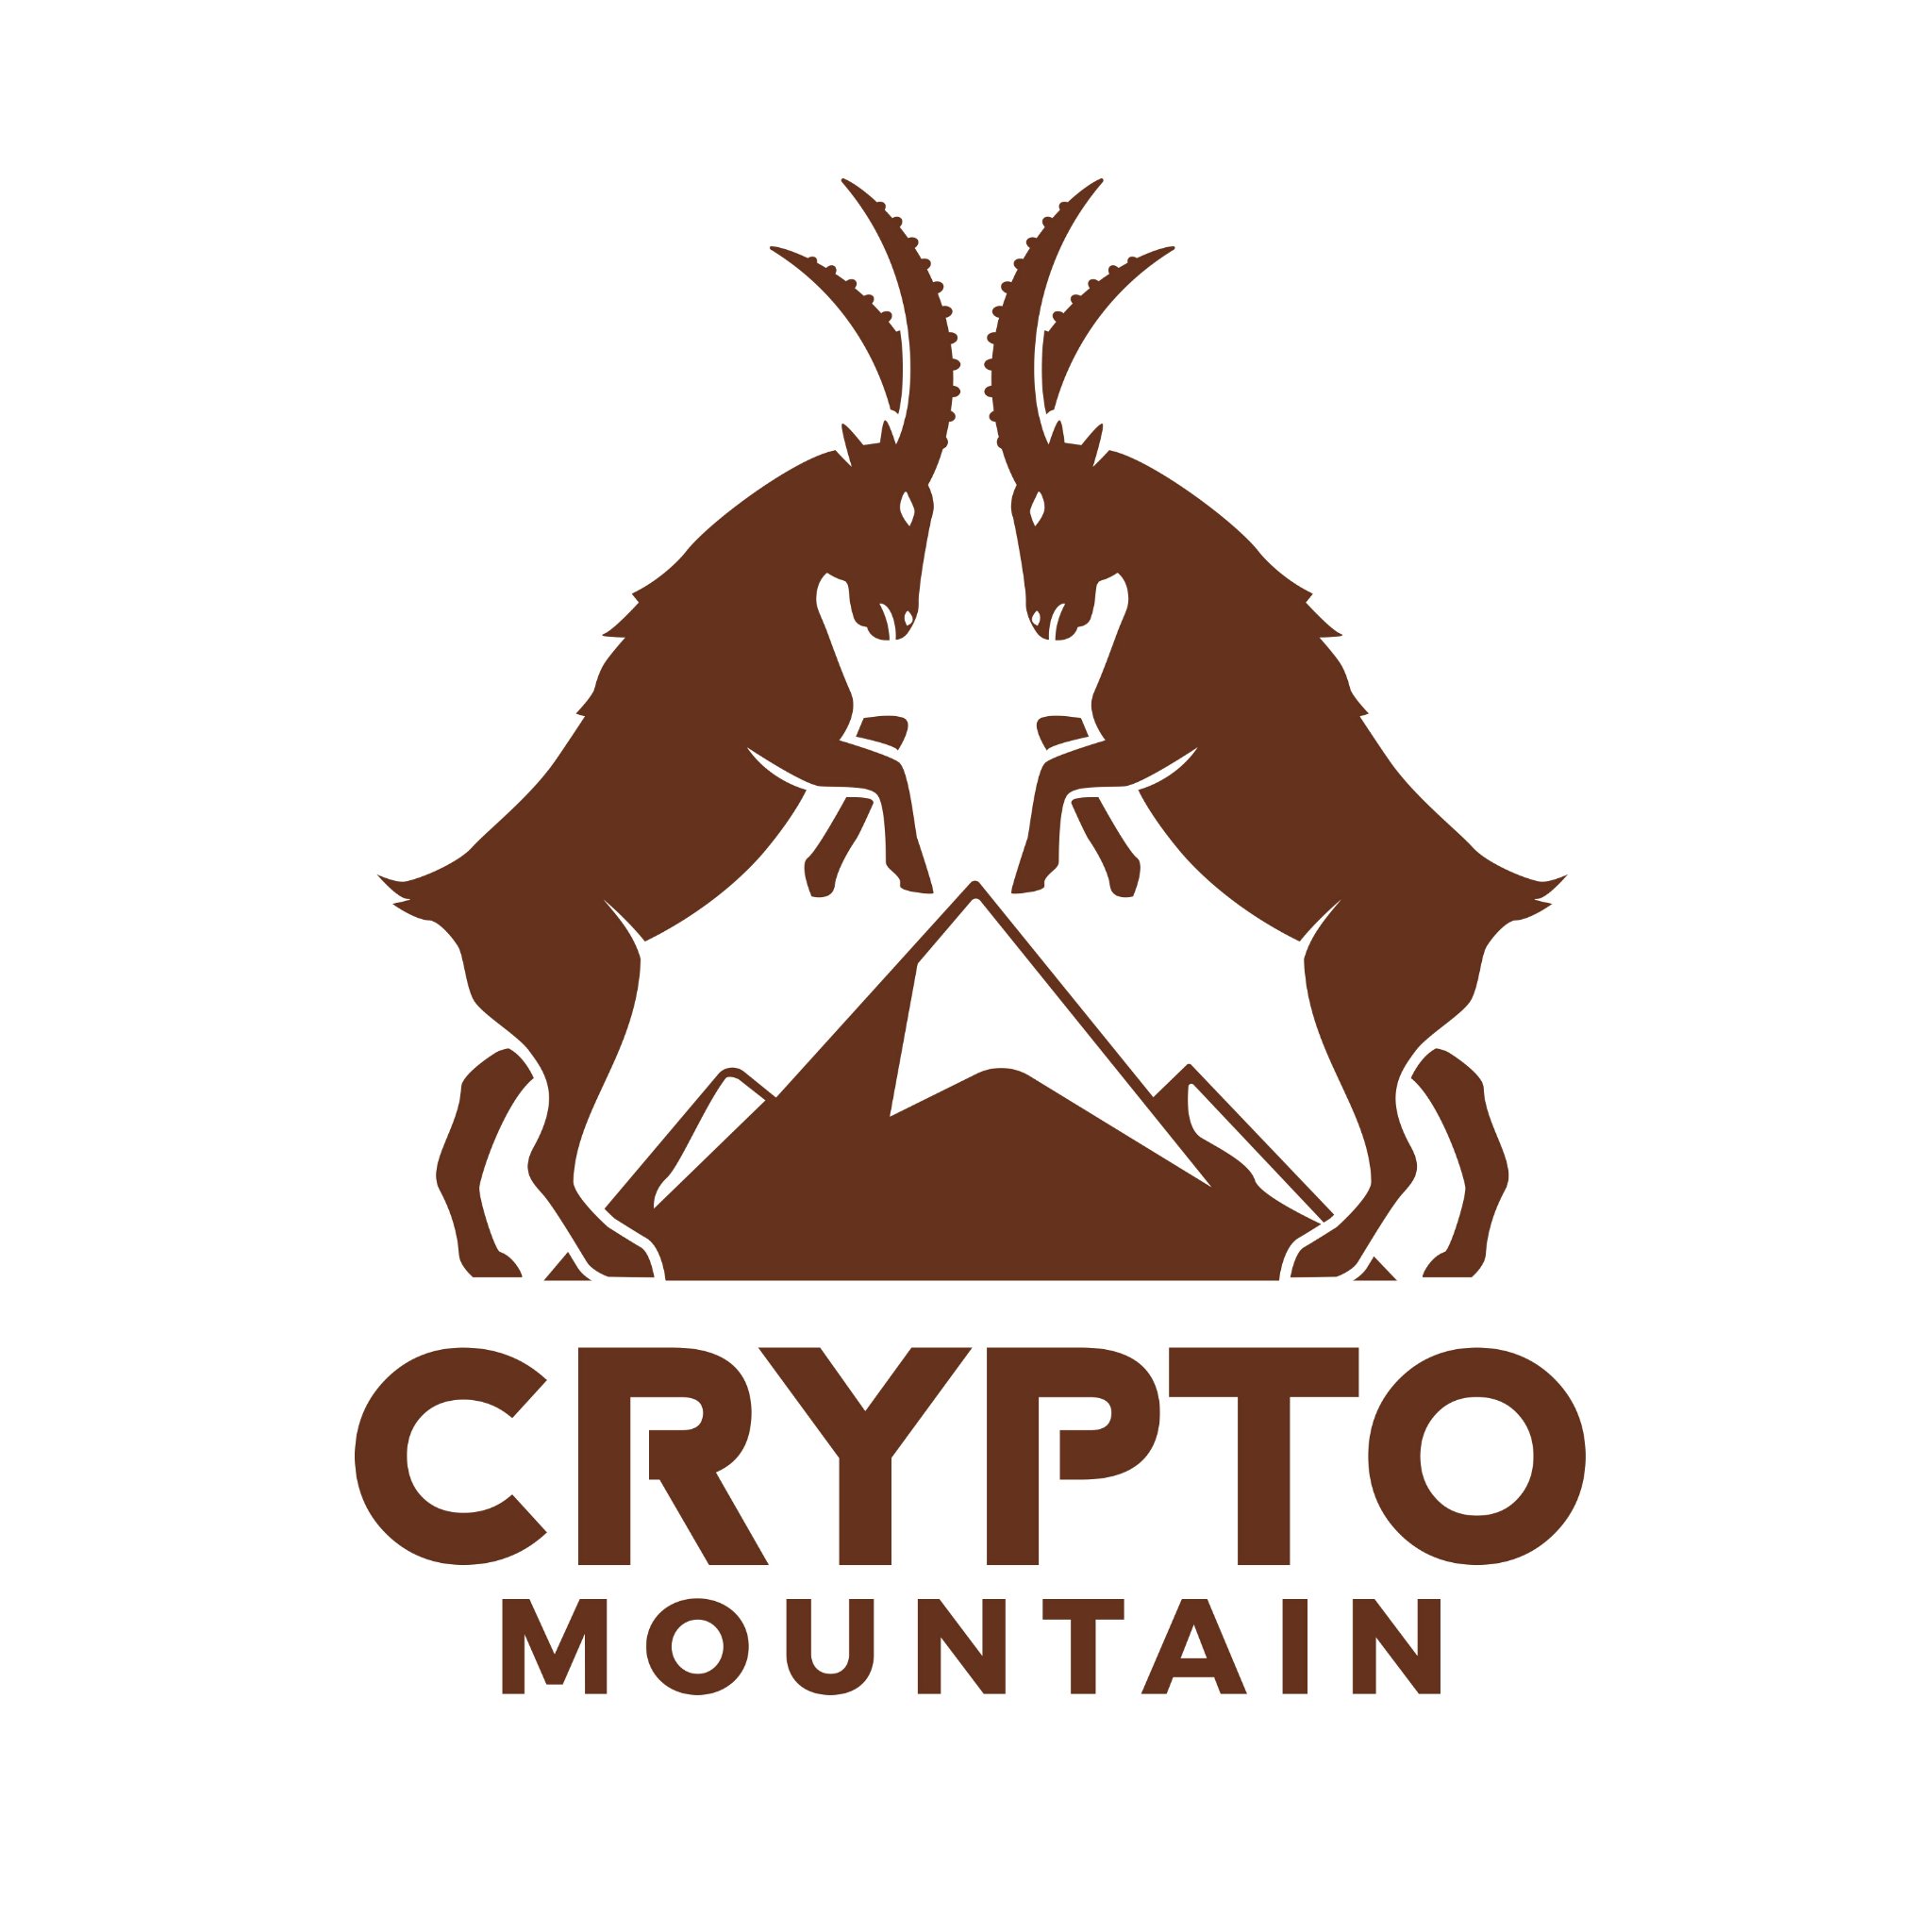 10 - 12 March in Davos. 7th edition of CRYPTO MOUNTAIN. Talkbattle #Bitcoin vs #Gold. Update on latest #Blockchain #web3 #AI trends and projects.